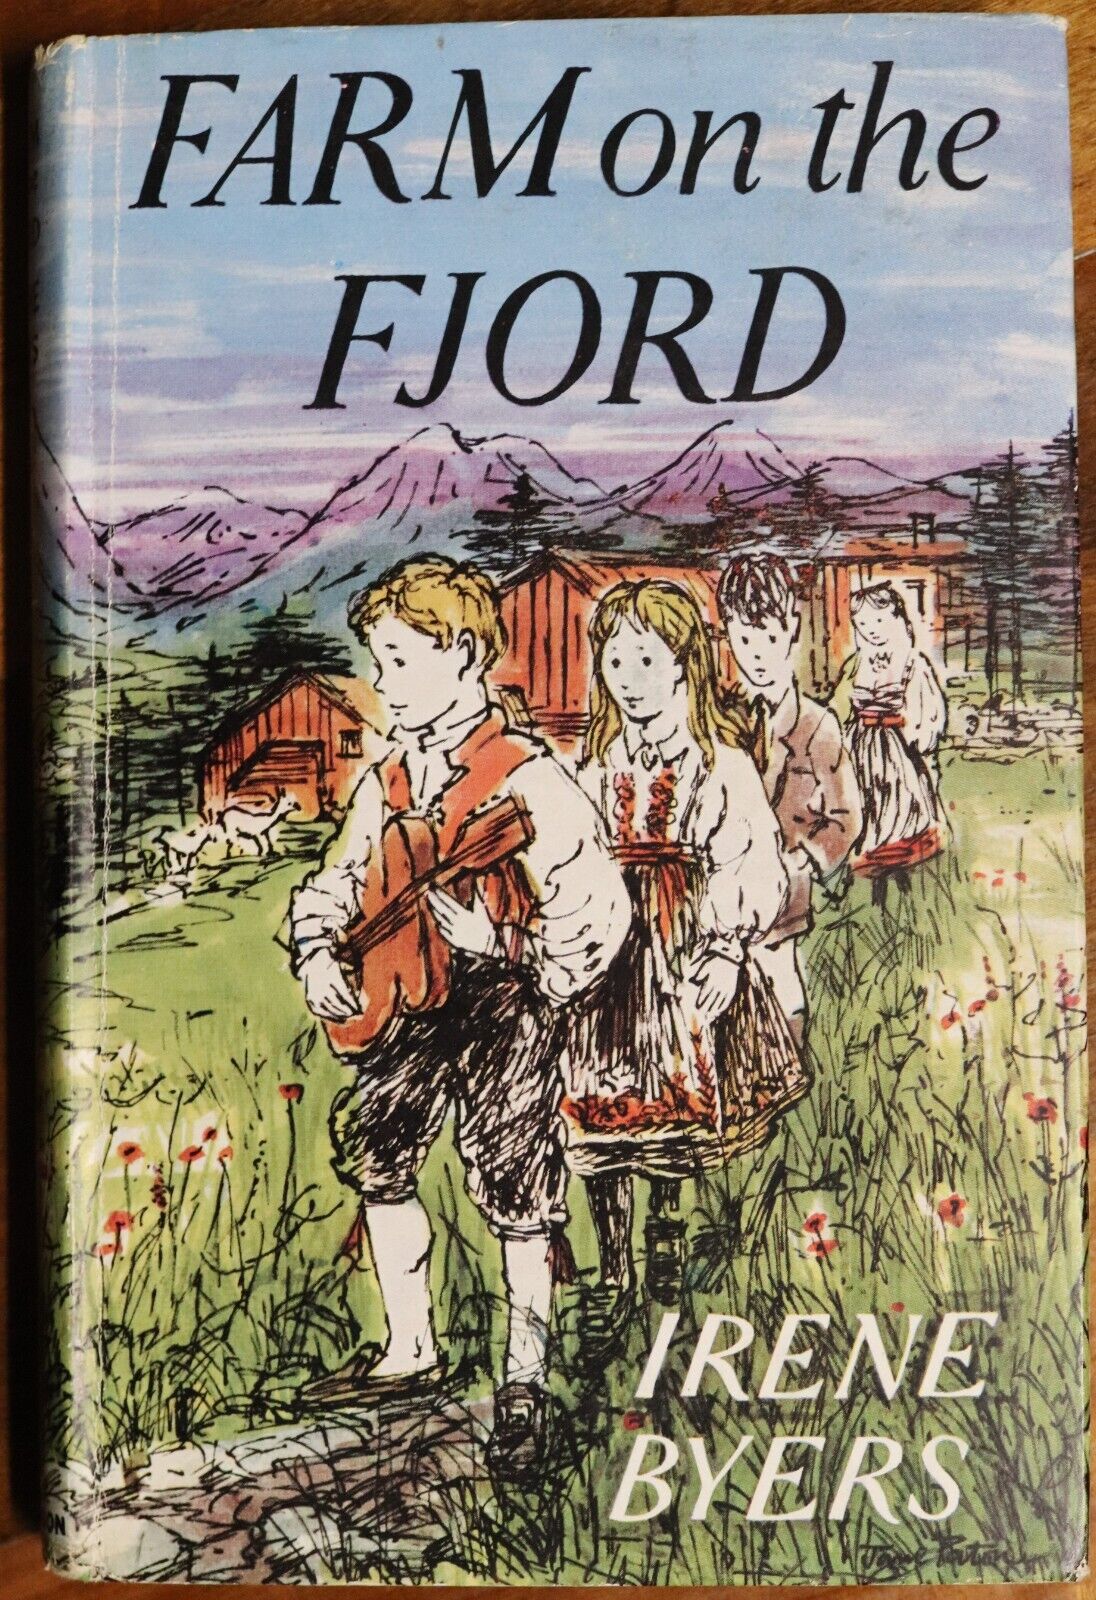 Farm On The Fjord by Irene Byers - 1961 - 1st Edition Childrens Story Book